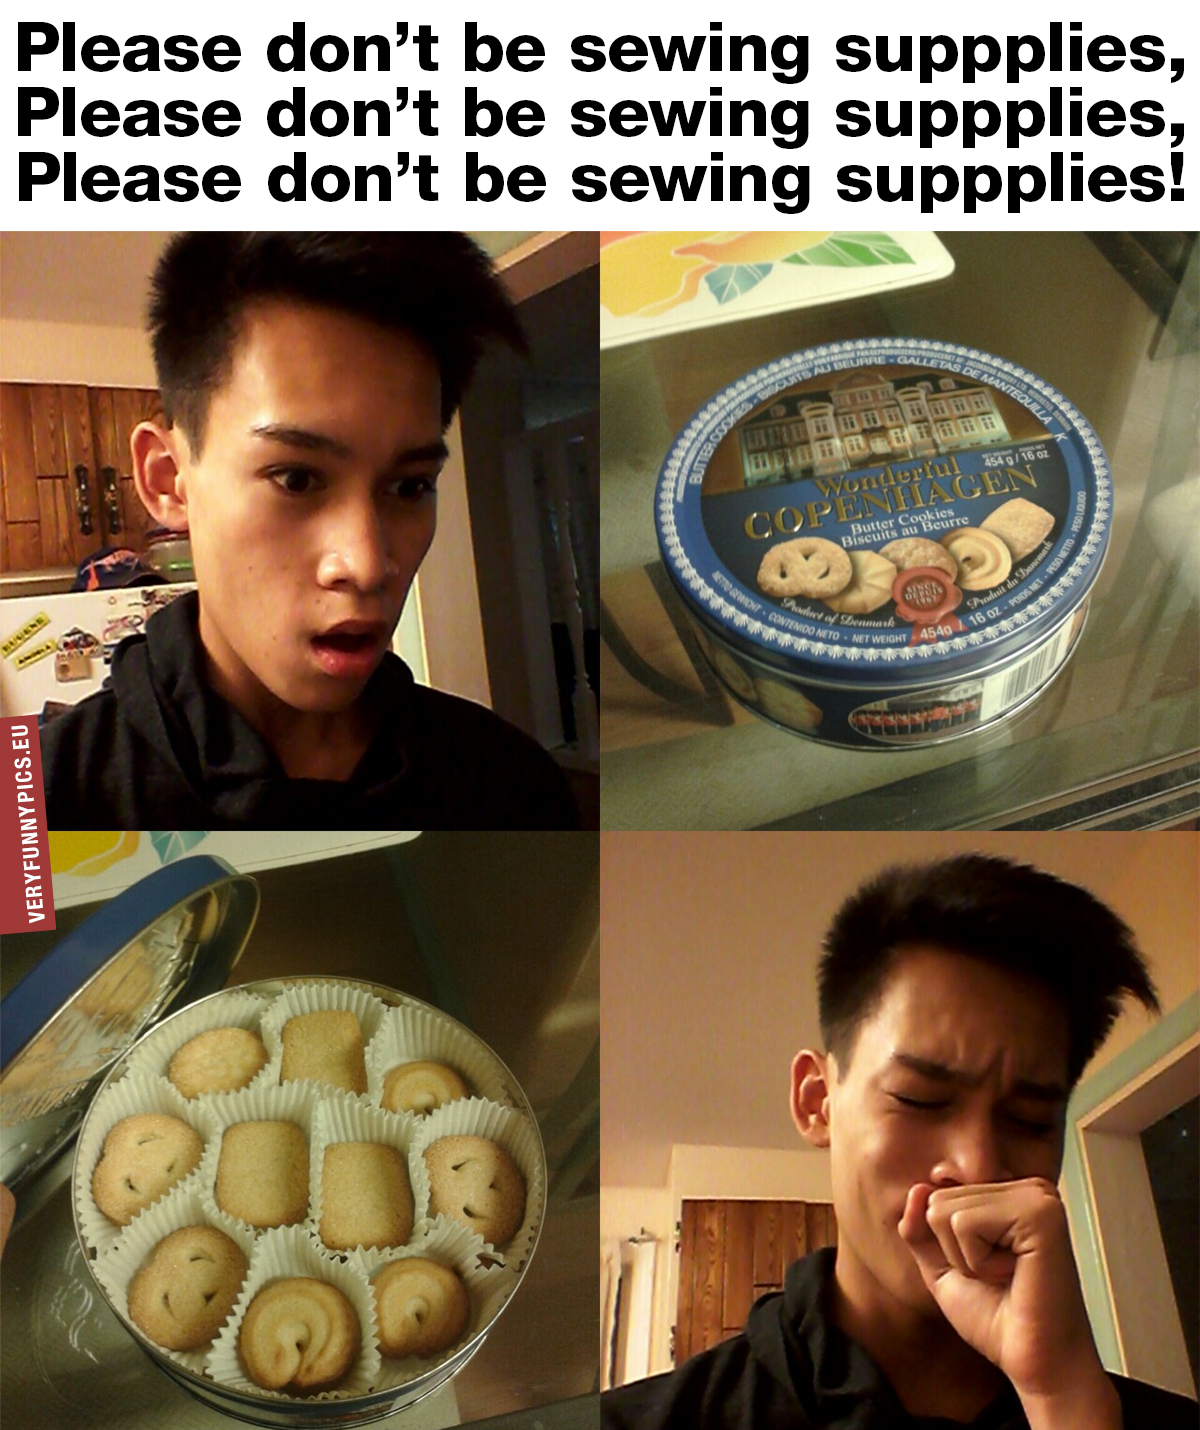 Sewing supplies in cookie tin